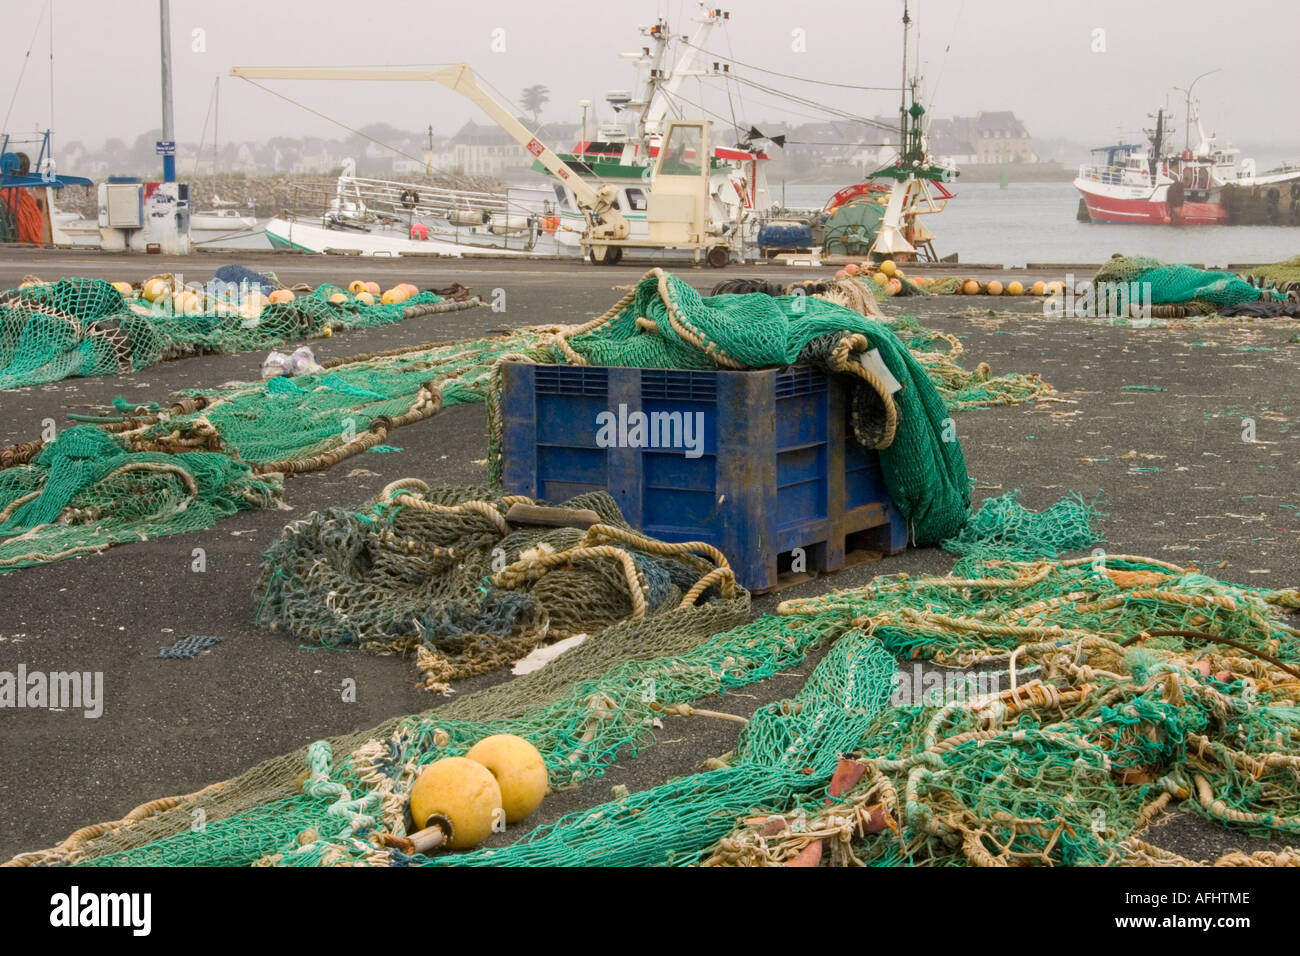 https://c8.alamy.com/comp/AFHTME/fishing-nets-laid-out-on-quayside-in-loctudy-brittany-france-with-AFHTME.jpg